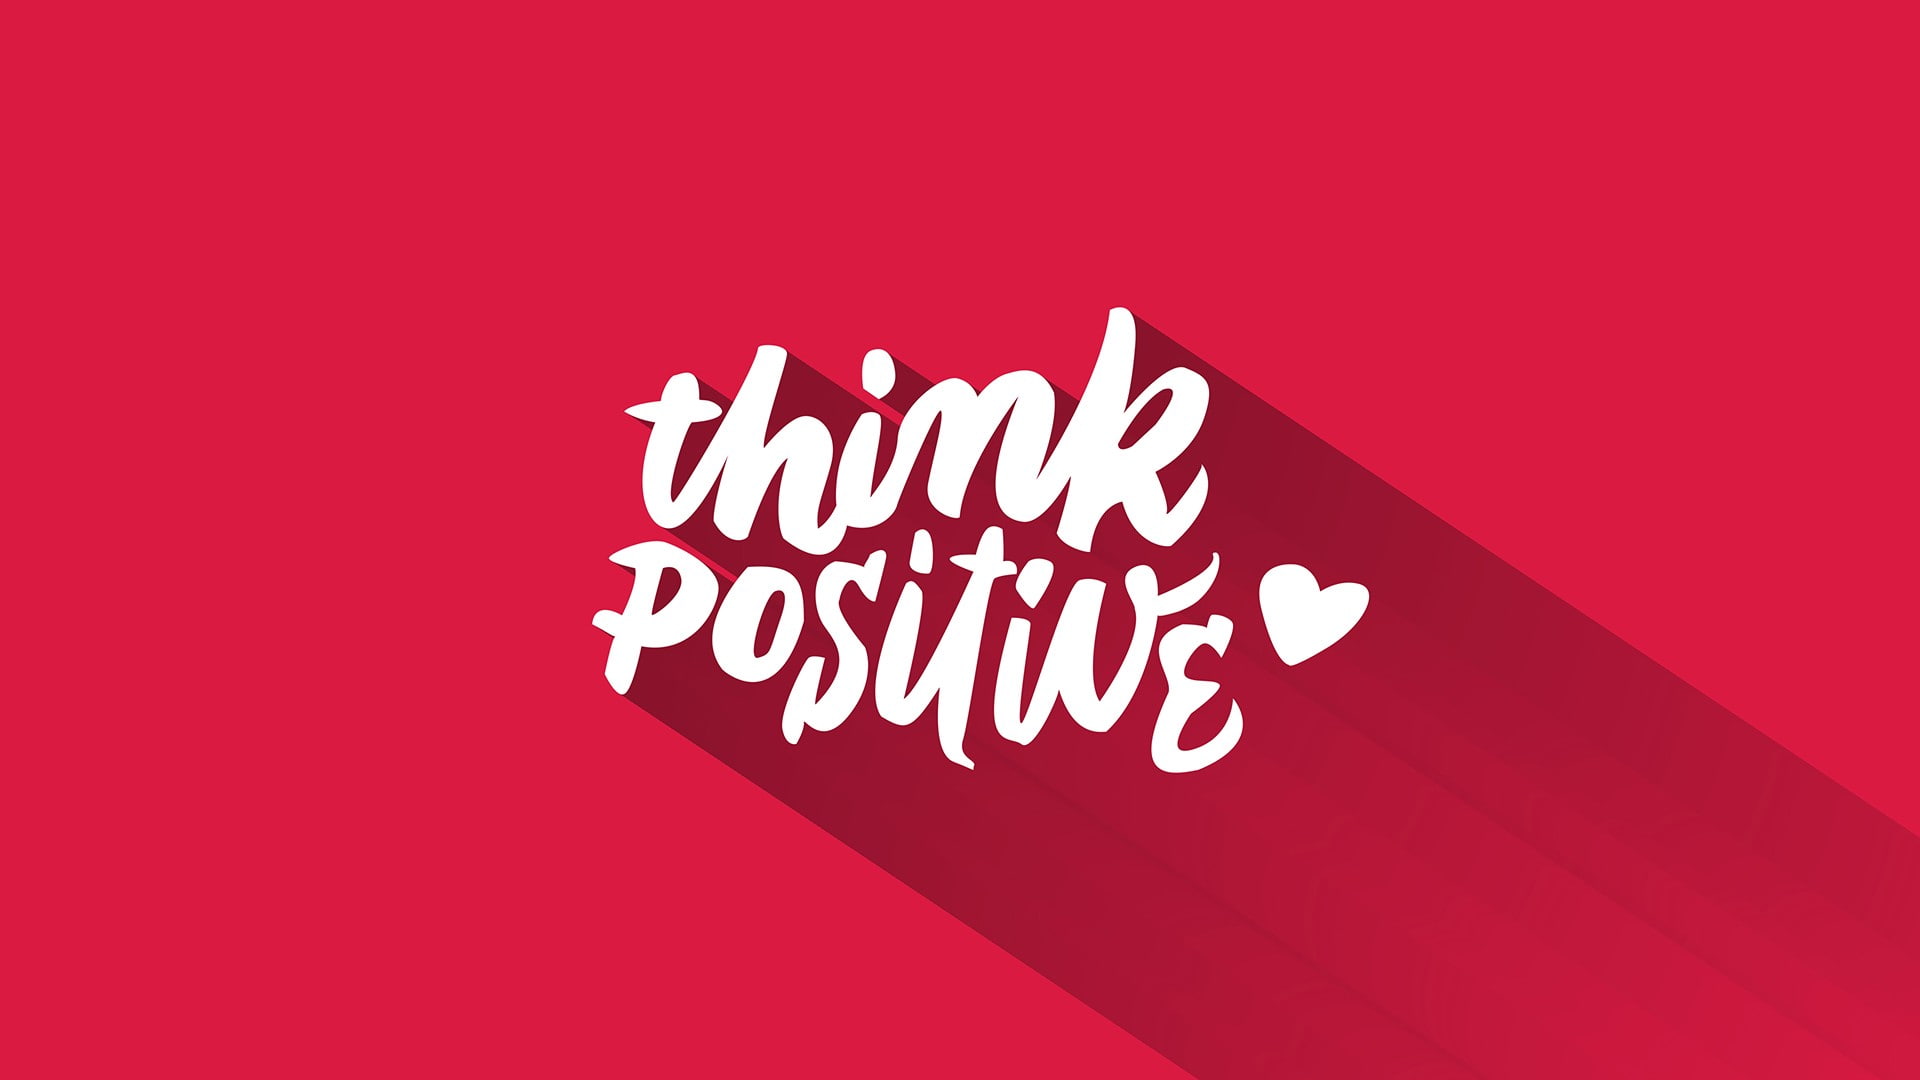 red background, typo, typography, motivational, quote, positive